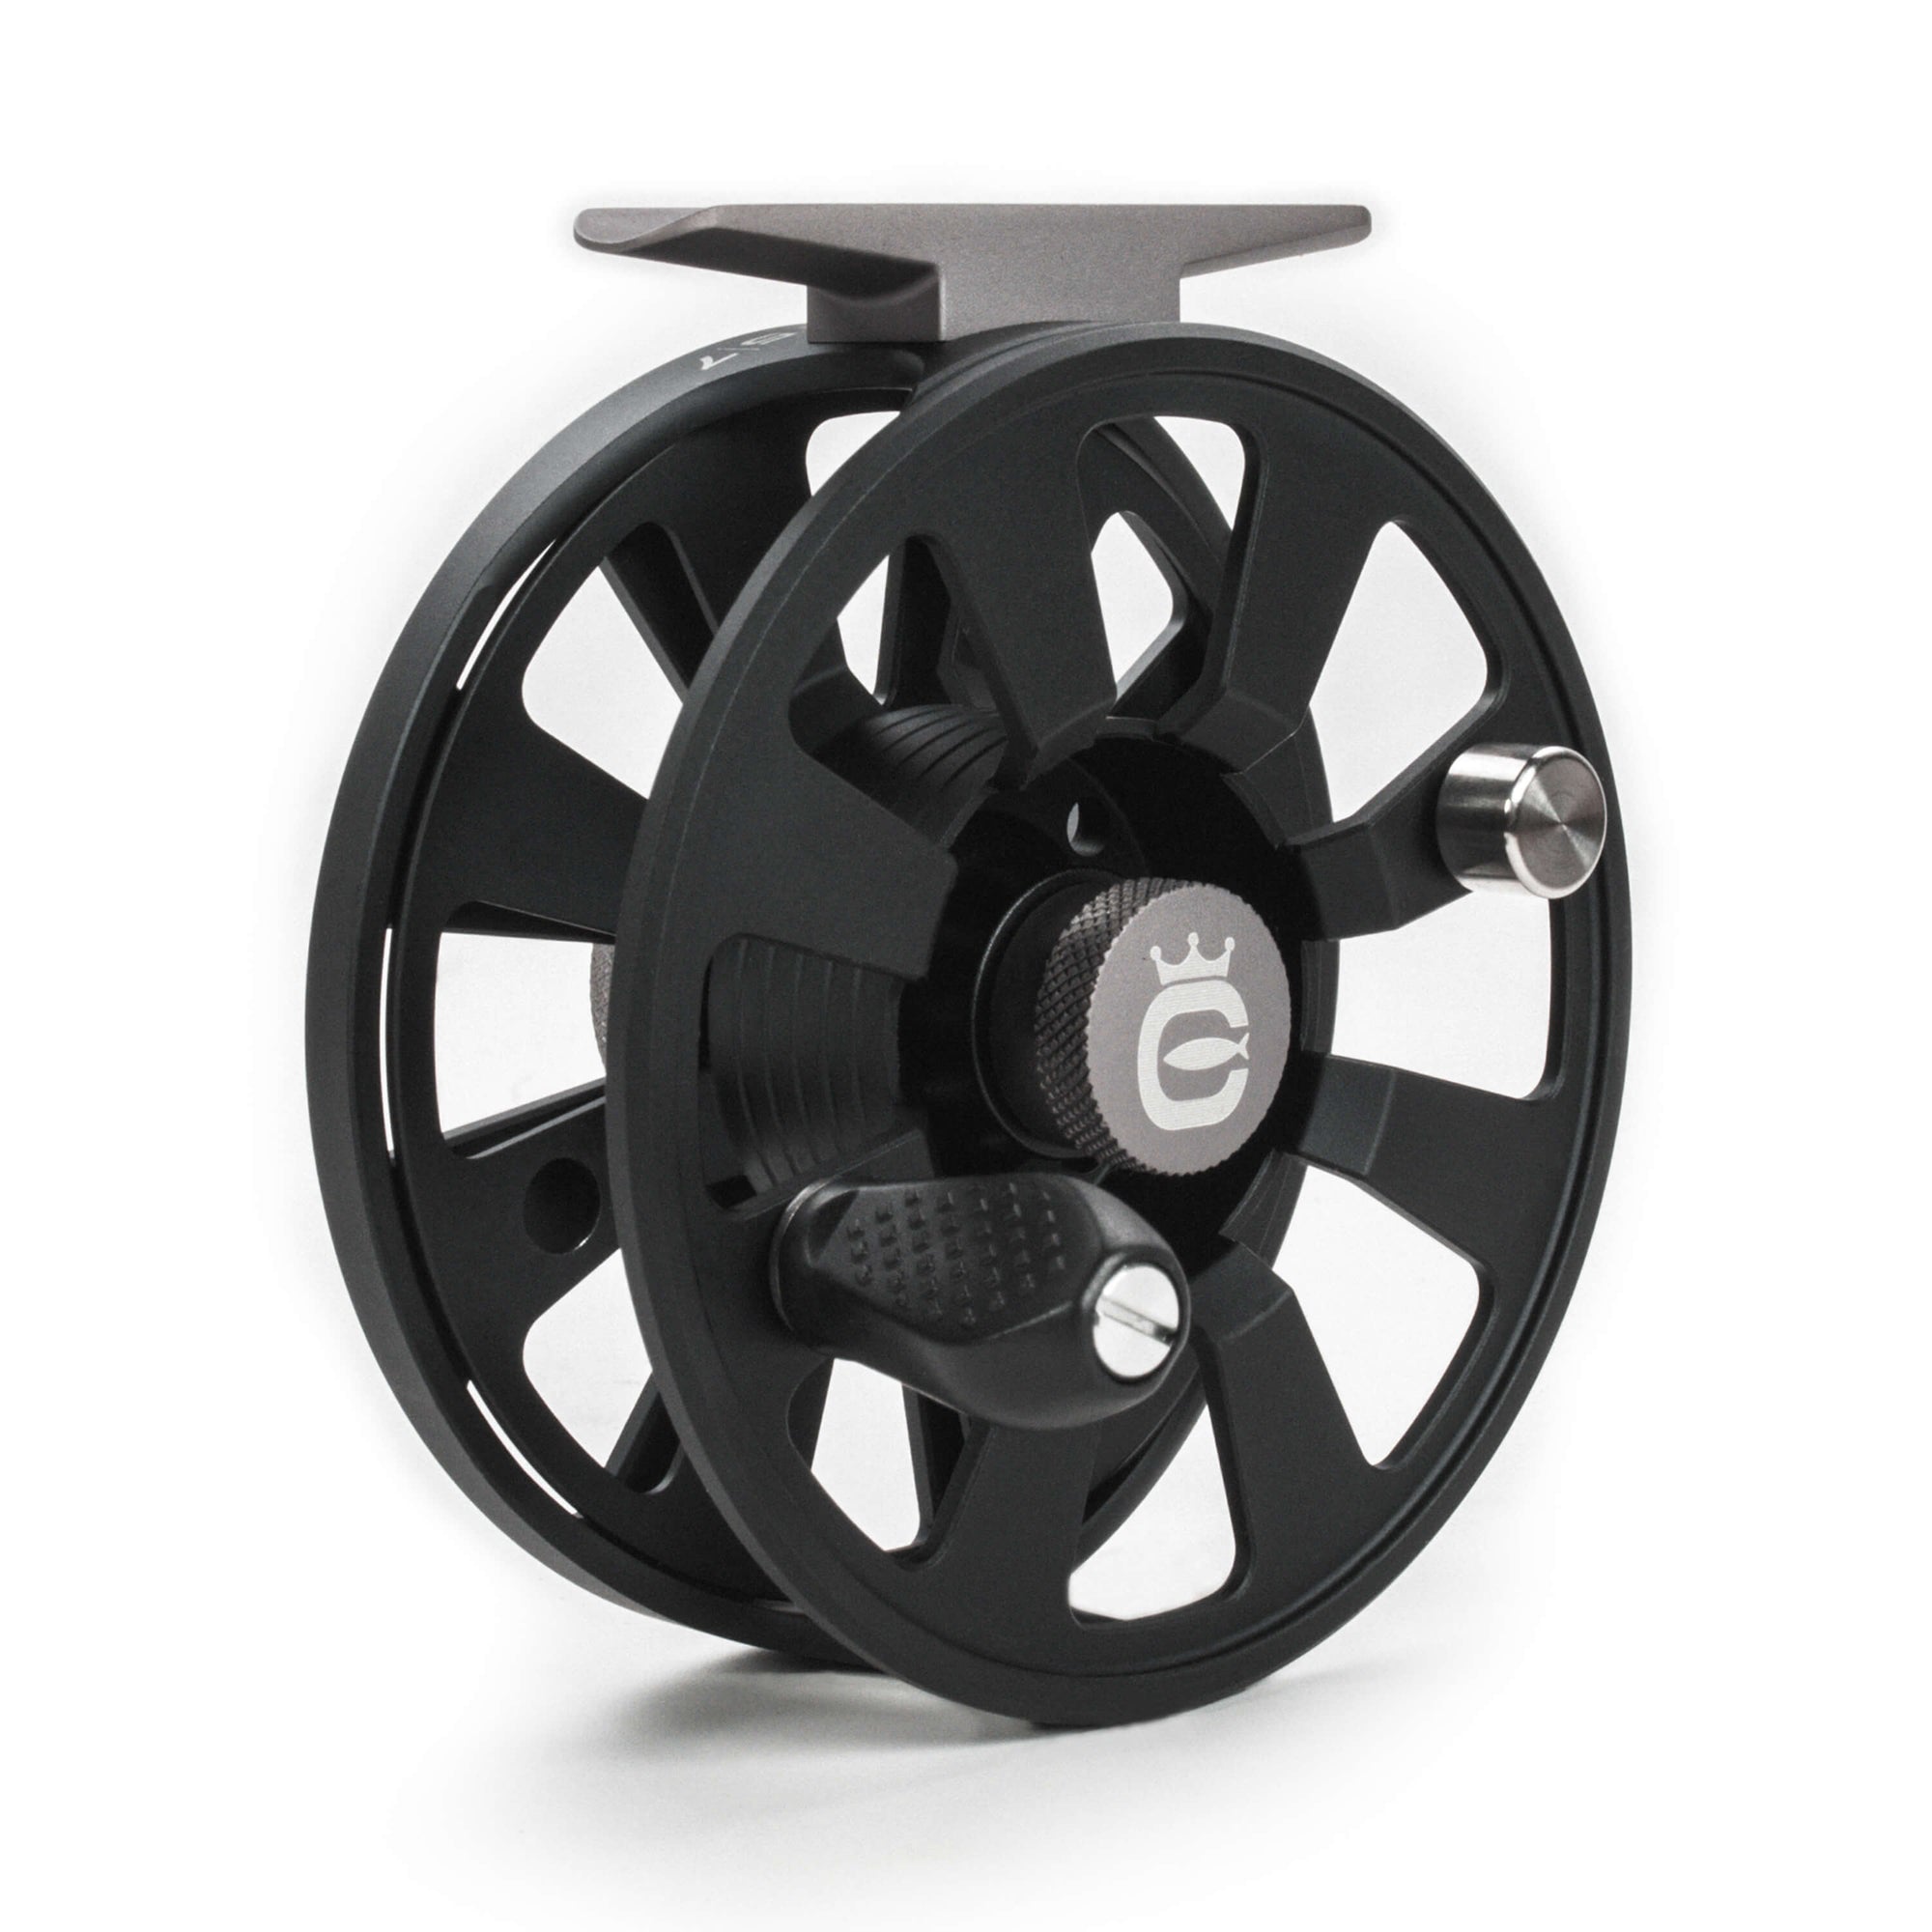 How To Switch a Martin Fly Reel's Retrieve? 